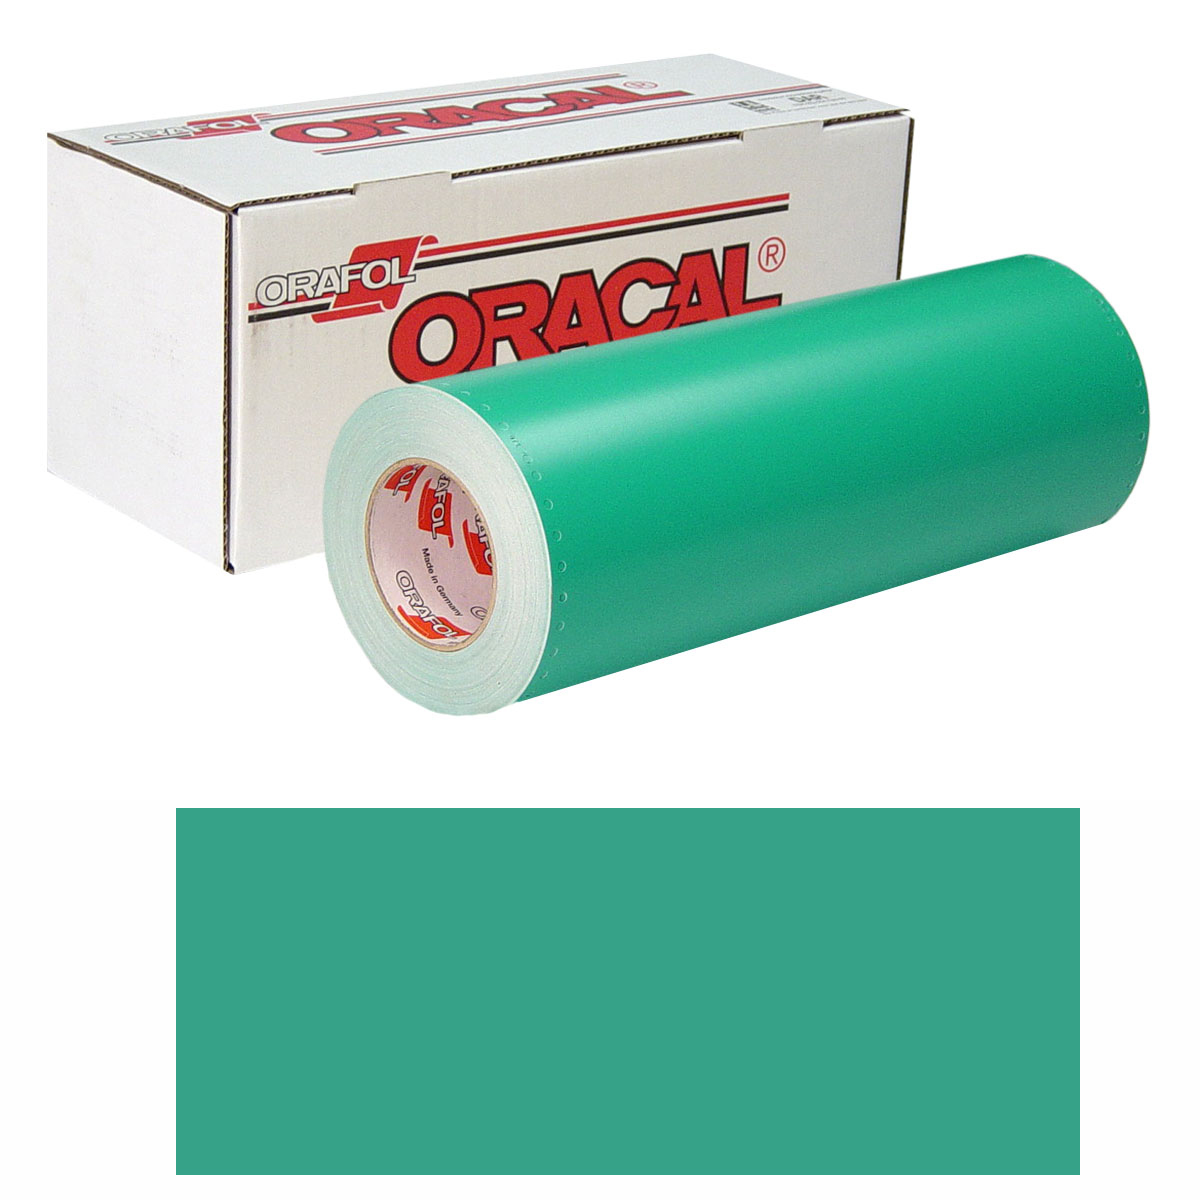 ORACAL 8500 30in X 10yd 009 Middle Green